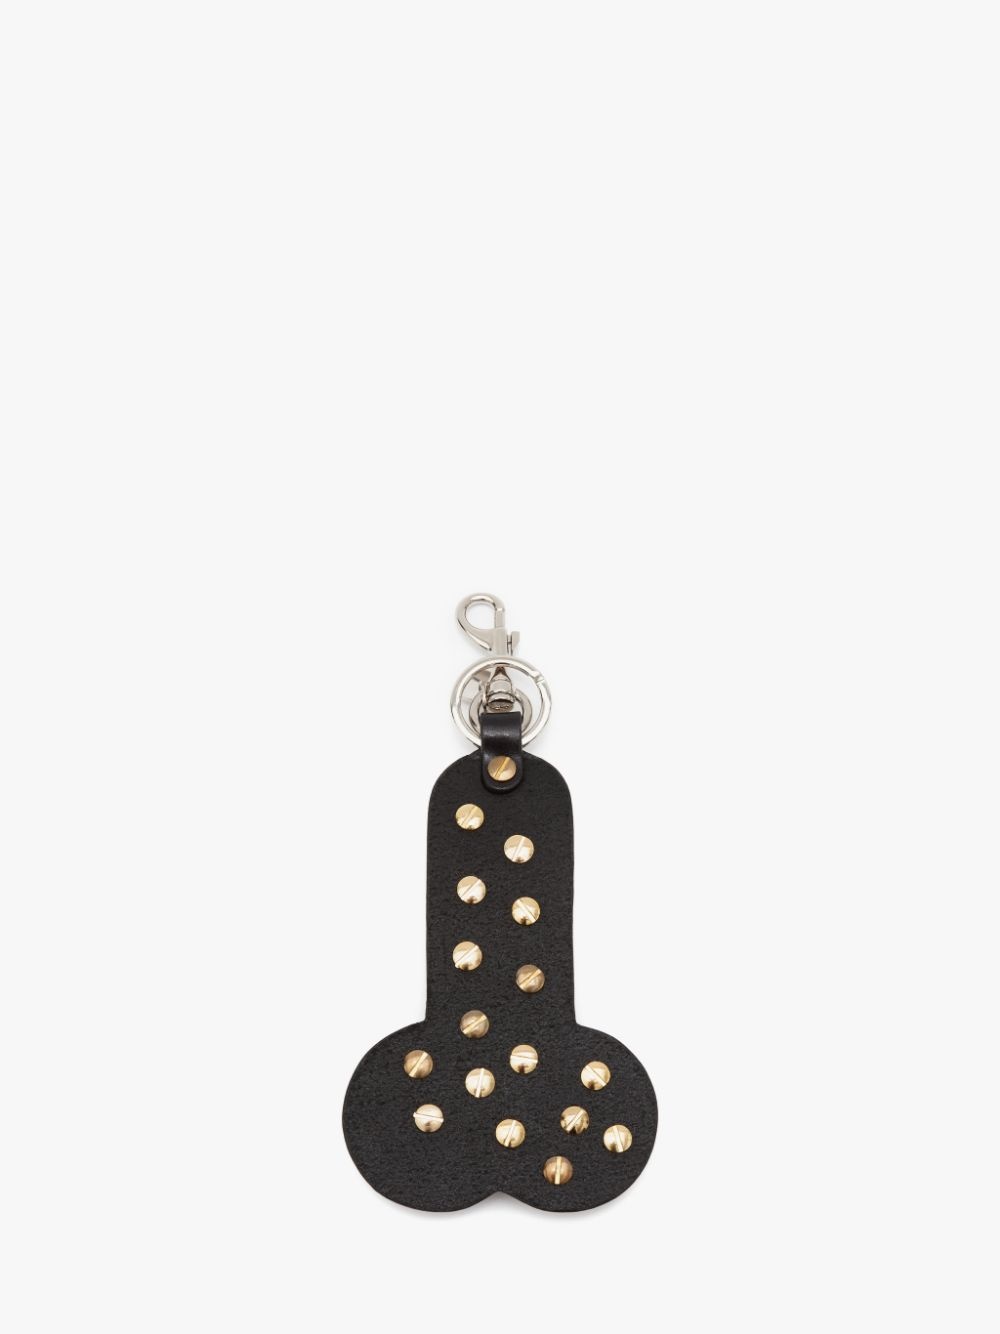 MADE IN BRITAIN: STUDDED PENIS KEYRING - 2